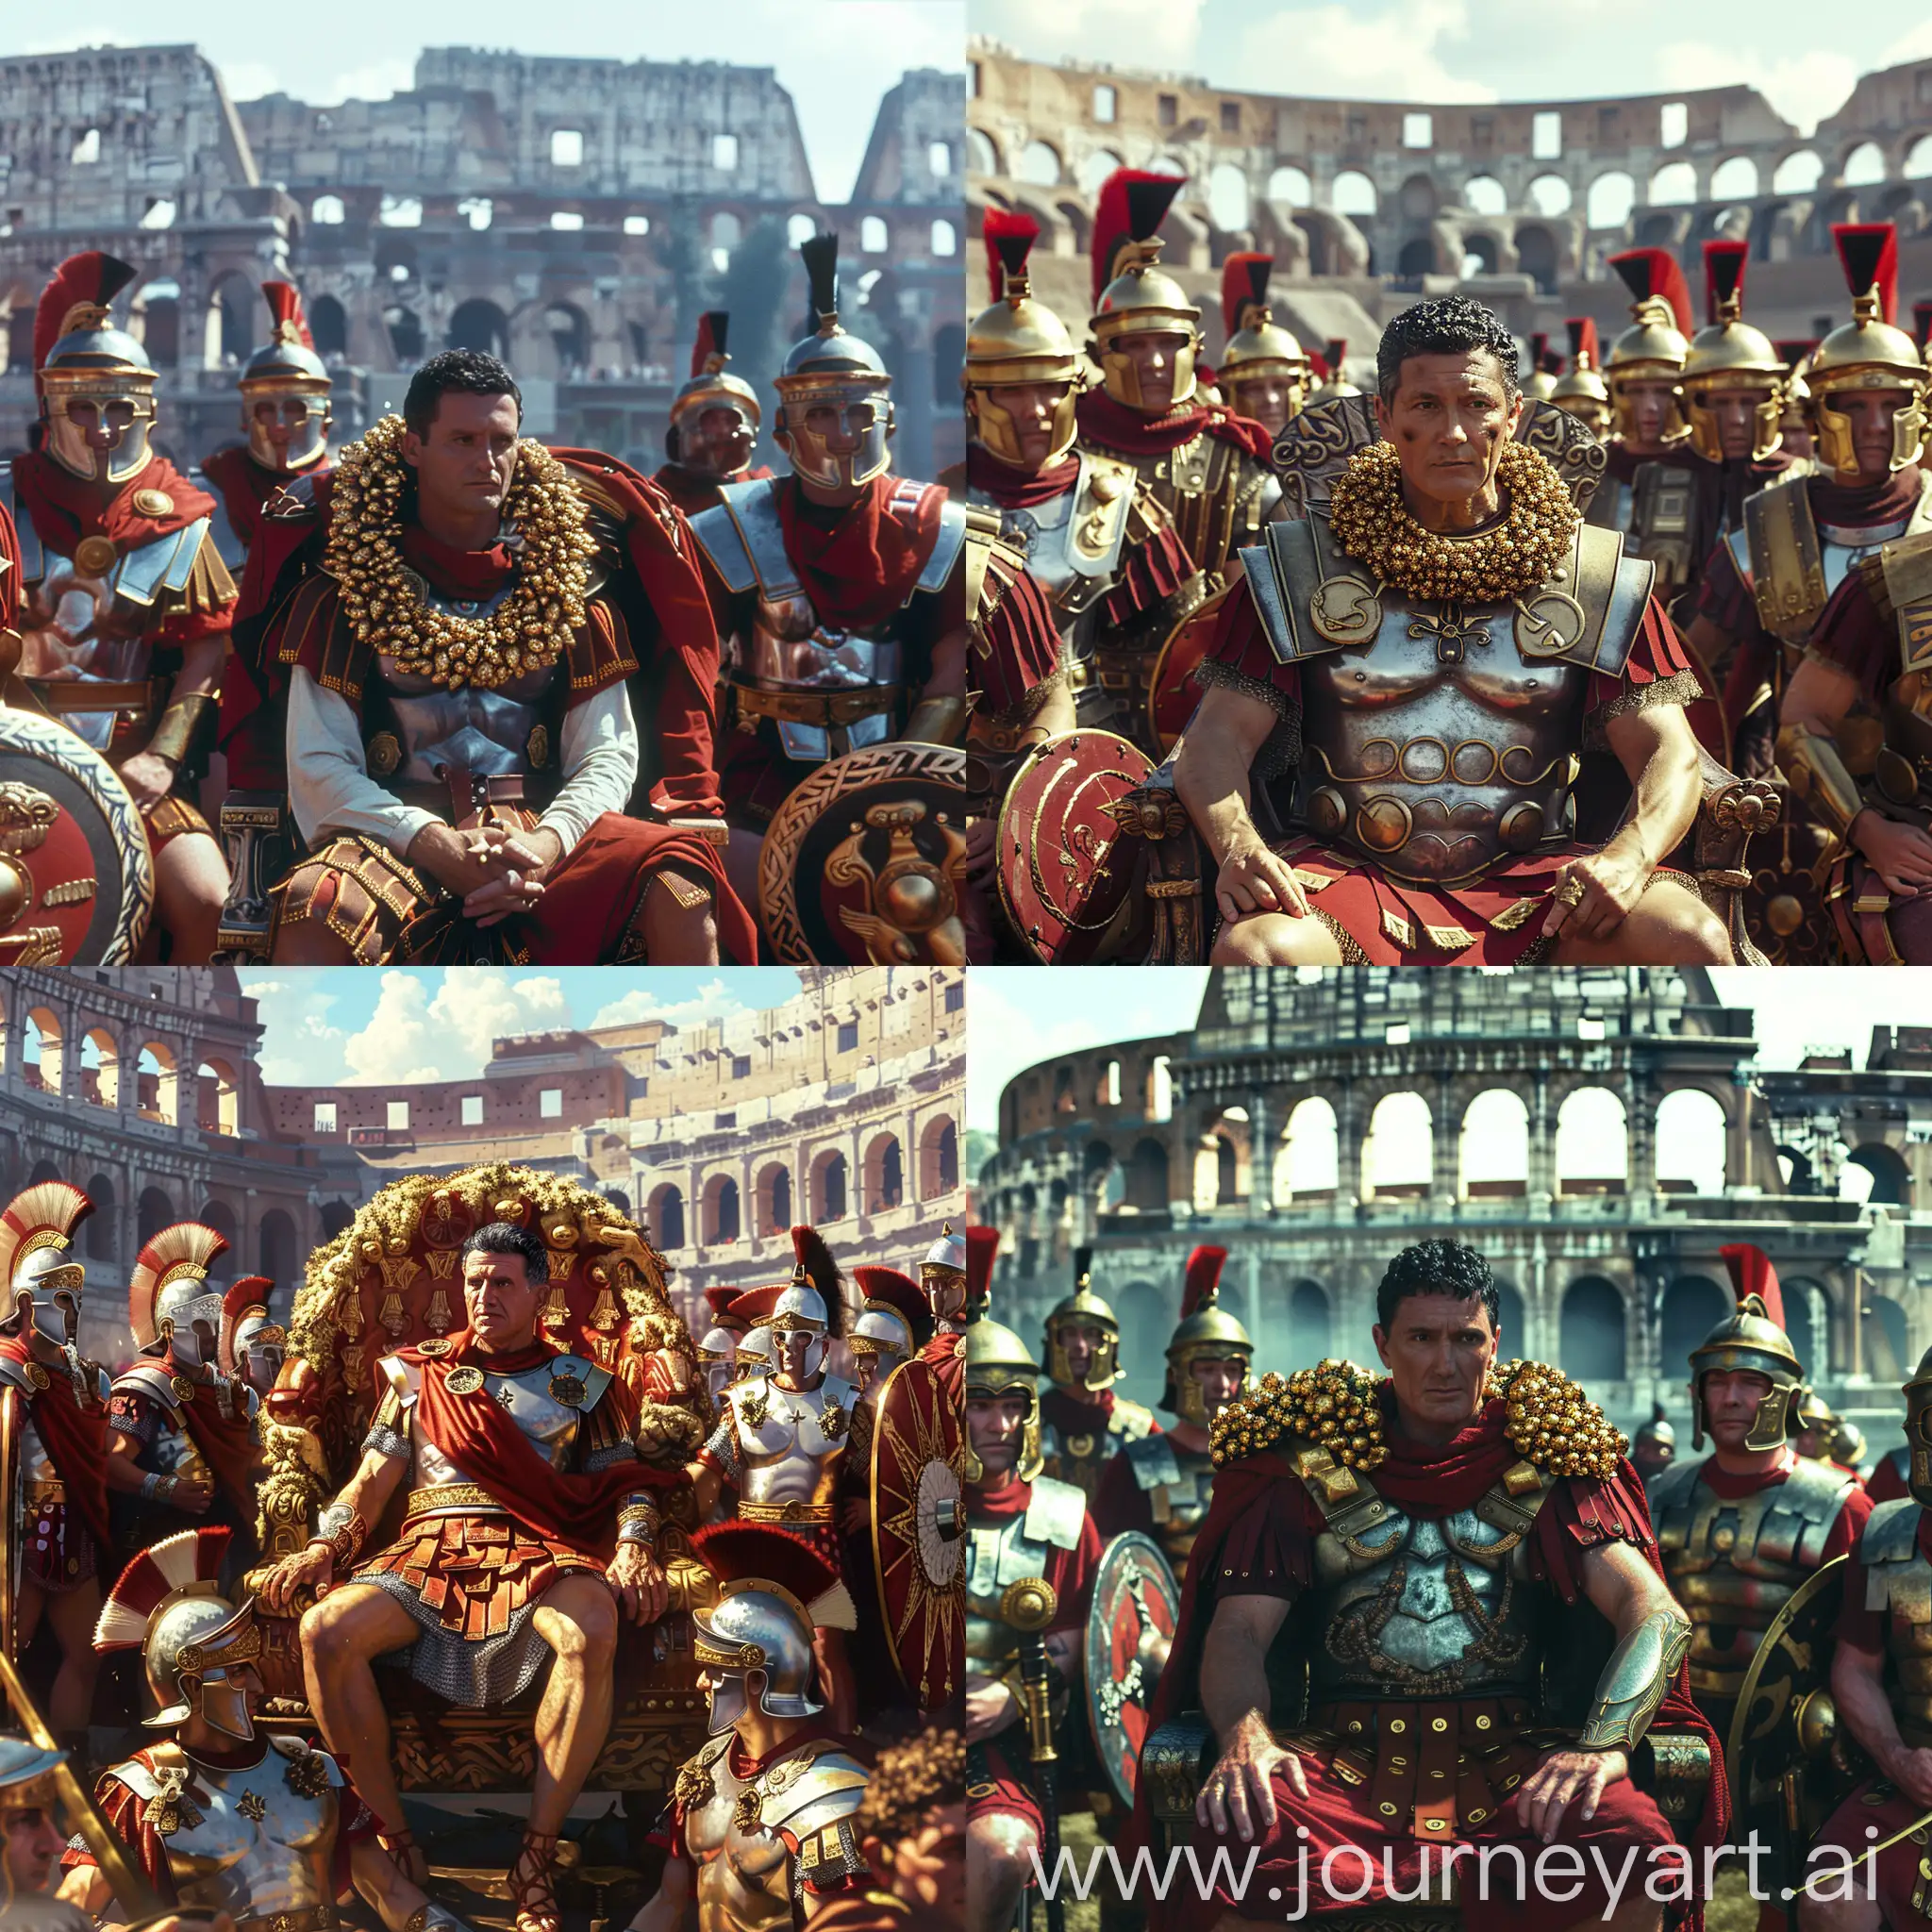 a middle-aged short black hair Cesar in roman golden wreath, in red and sliver armor, he is sitting on his imperial throne in the middle,

other Roman legionaries stand around him, they are in helmets, in red and sliver armor, with shields

they are all before the colosseum of ancient Roman city